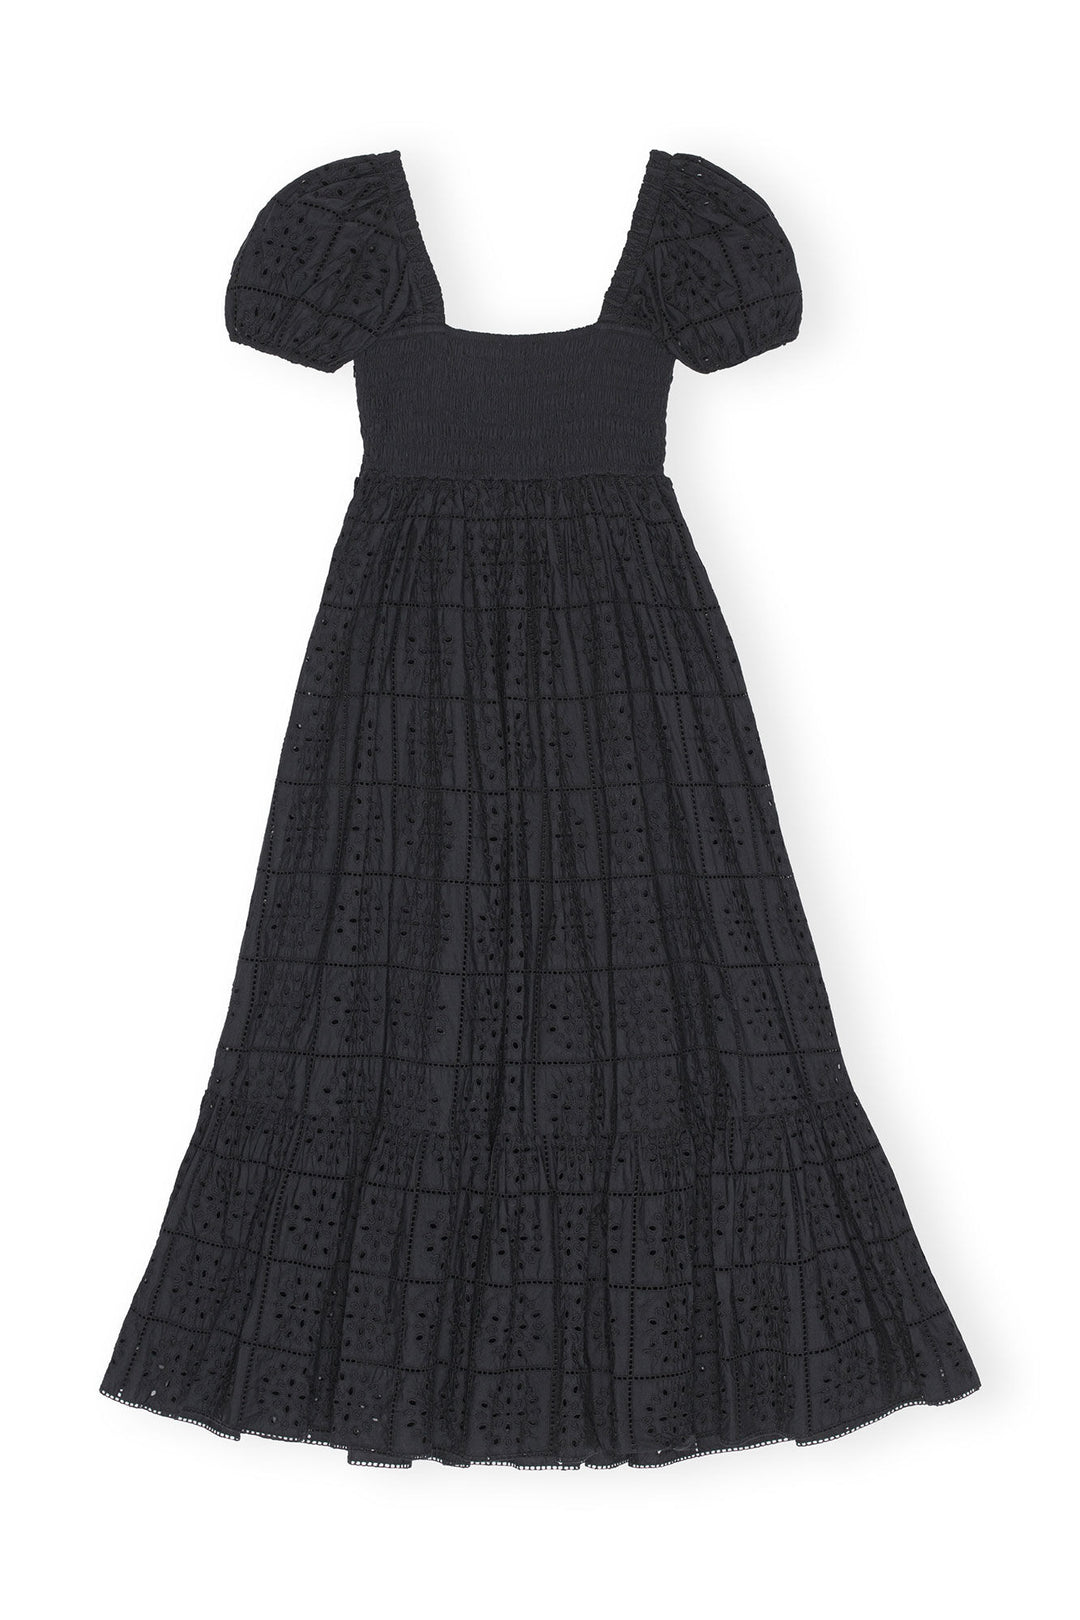 BRODERIE ANGLAISE MAXI DRESS  Black